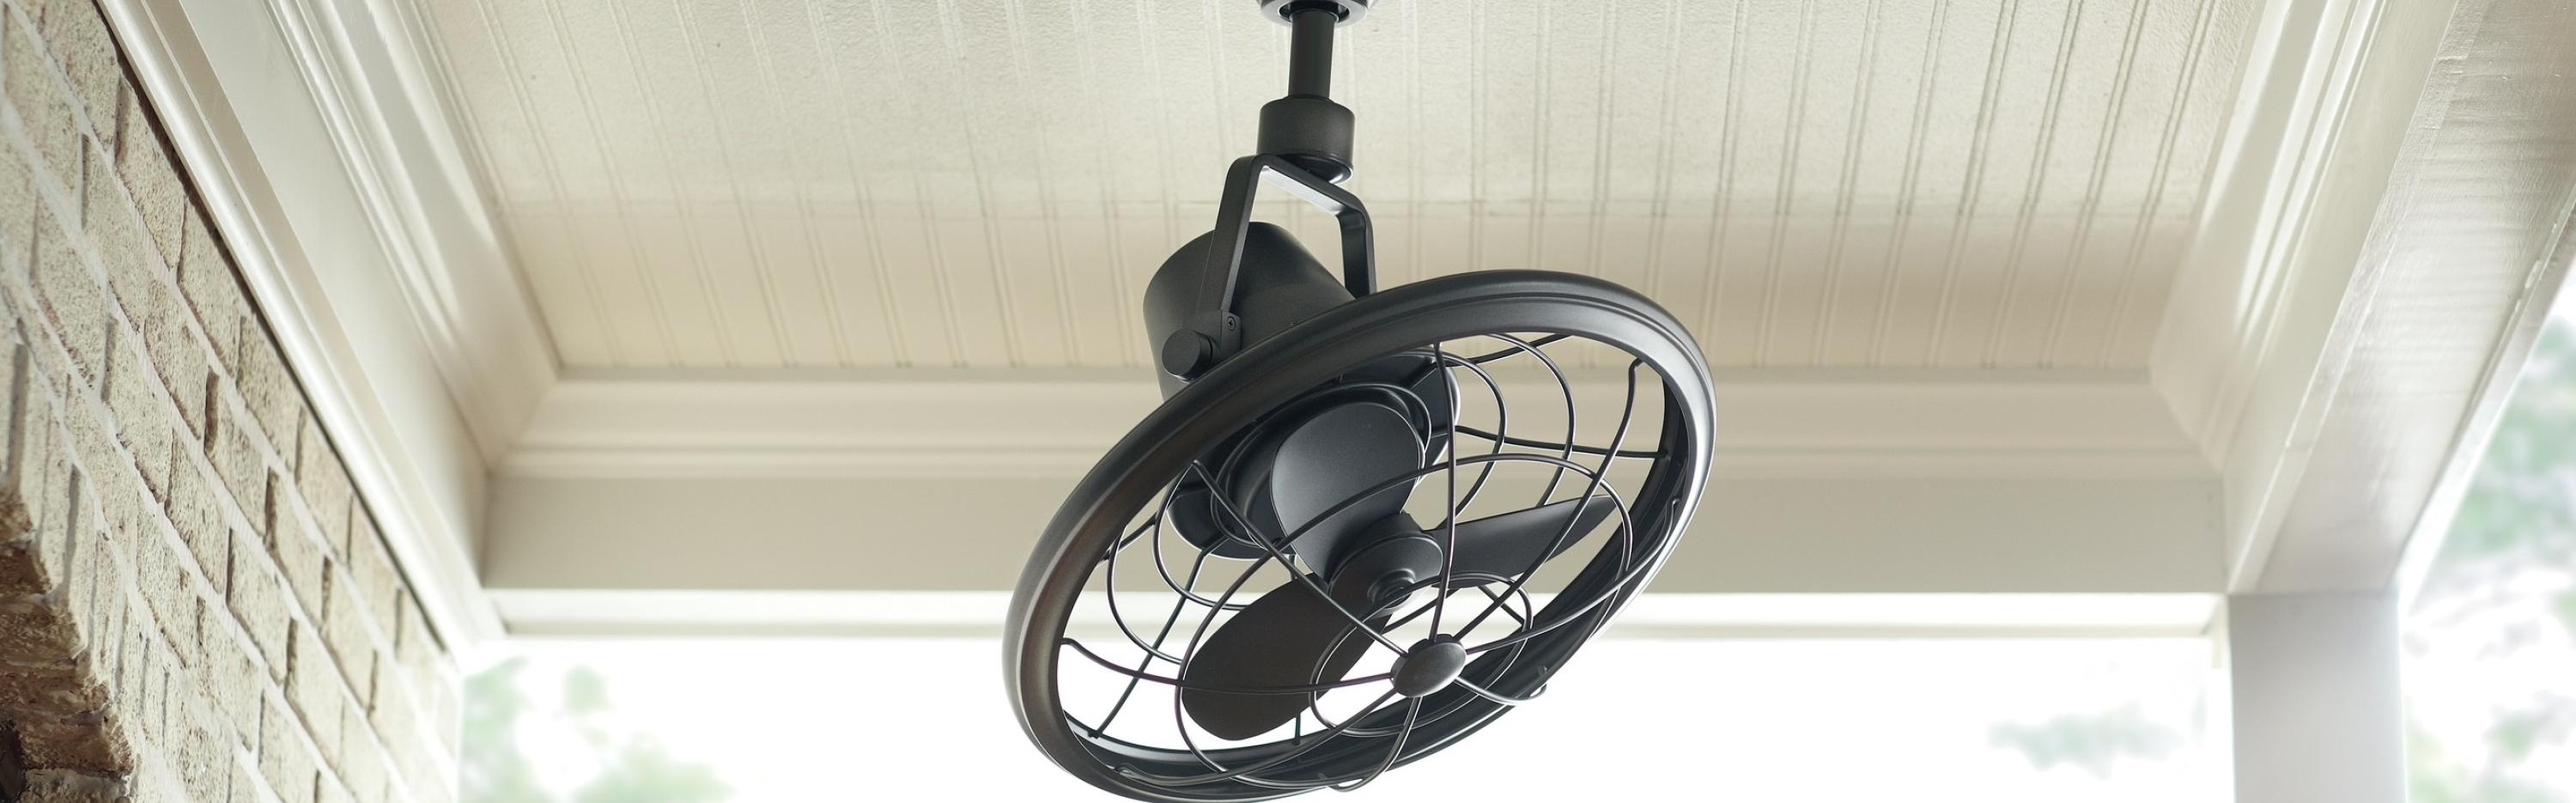 Outdoor fan from The Home Depot